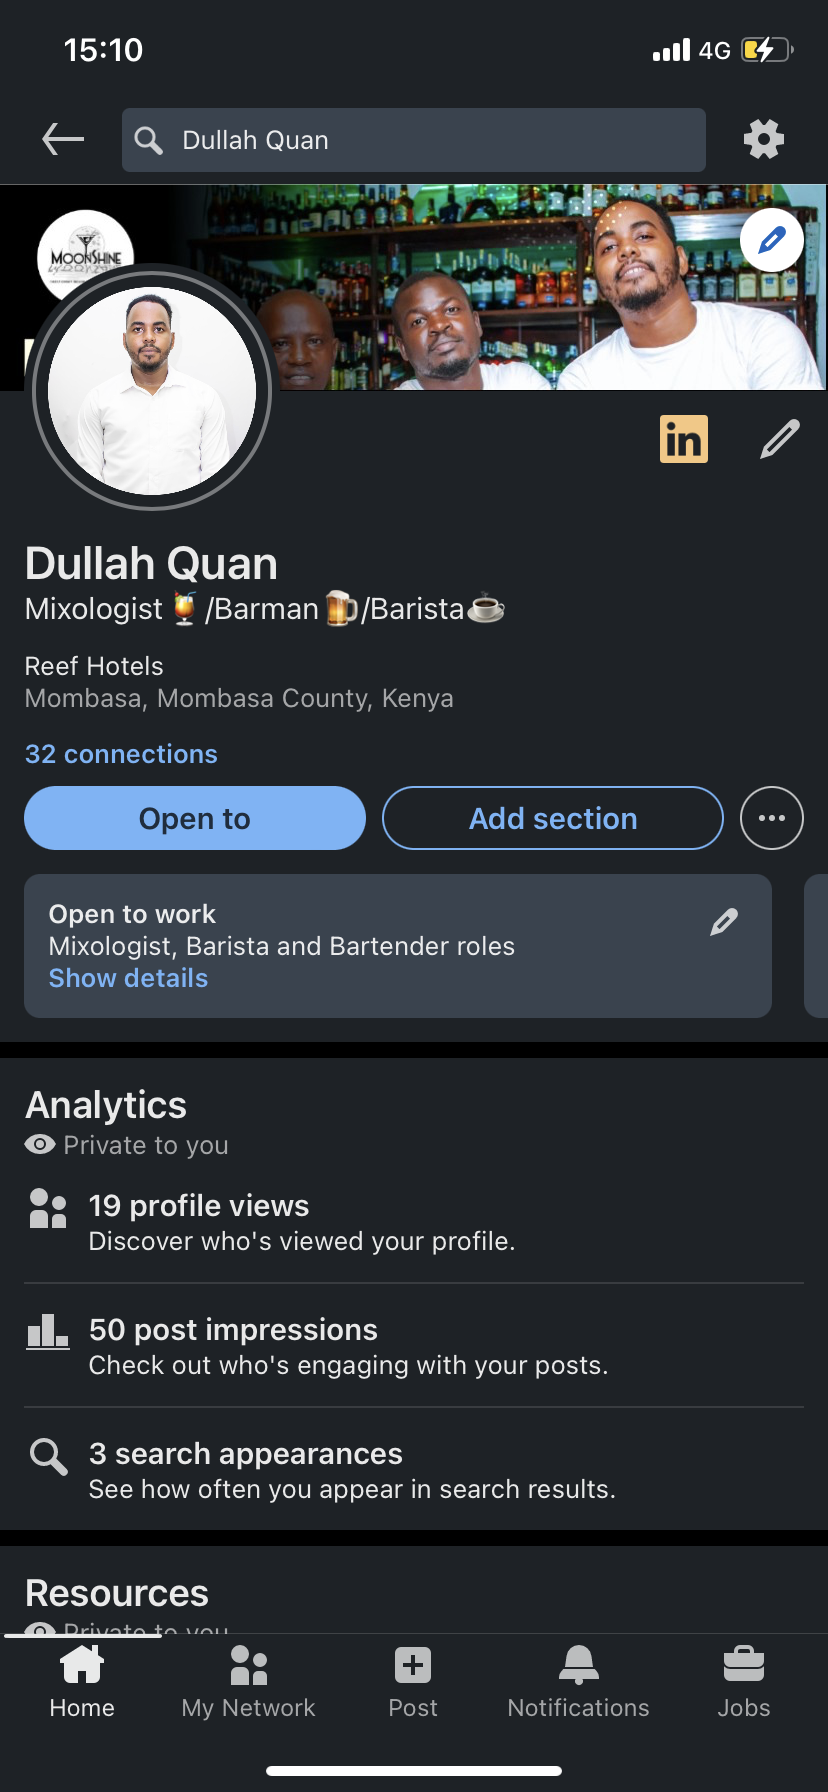 15:10 RIAs

&amp; Q Dullah Quan $$

[2] LRT Vey
ET eal

 
   
 
 

Dullah Quan
Mixologist ® /Barman PERC)

Reef Hotels
Mombasa, Mombasa County, Kenya

32 connections

EE (oe 0

Open to work 2
Mixologist, Barista and Bartender roles
Show details

Analytics
© Private to you

22 19 profile views

Discover who's viewed your profile.

[7] EON TE Ty TICES
Check out who's engaging with your posts.

3 search appearances
See how often you appear in search results.

Resources
—MA\ Doiiatotn vin

a ry =

[aleInle] My Network [21 Notifications Nol HS